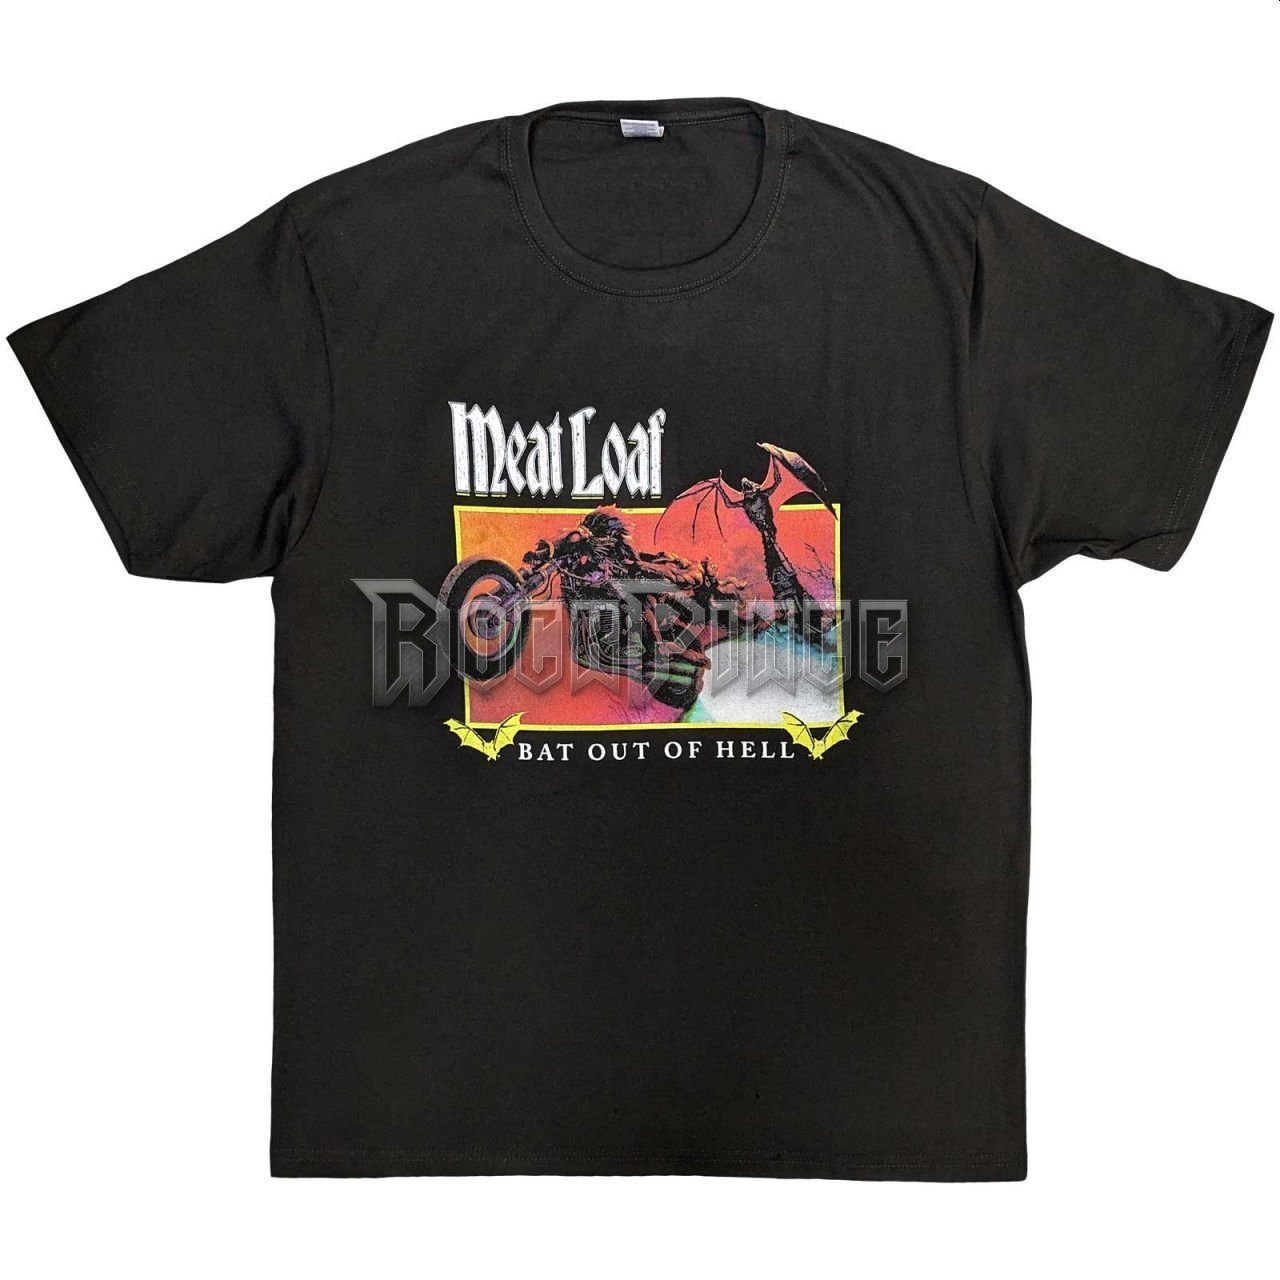 Meat Loaf - Bat Out Of Hell Rectangle - unisex póló - MEATTS08MC - TDM